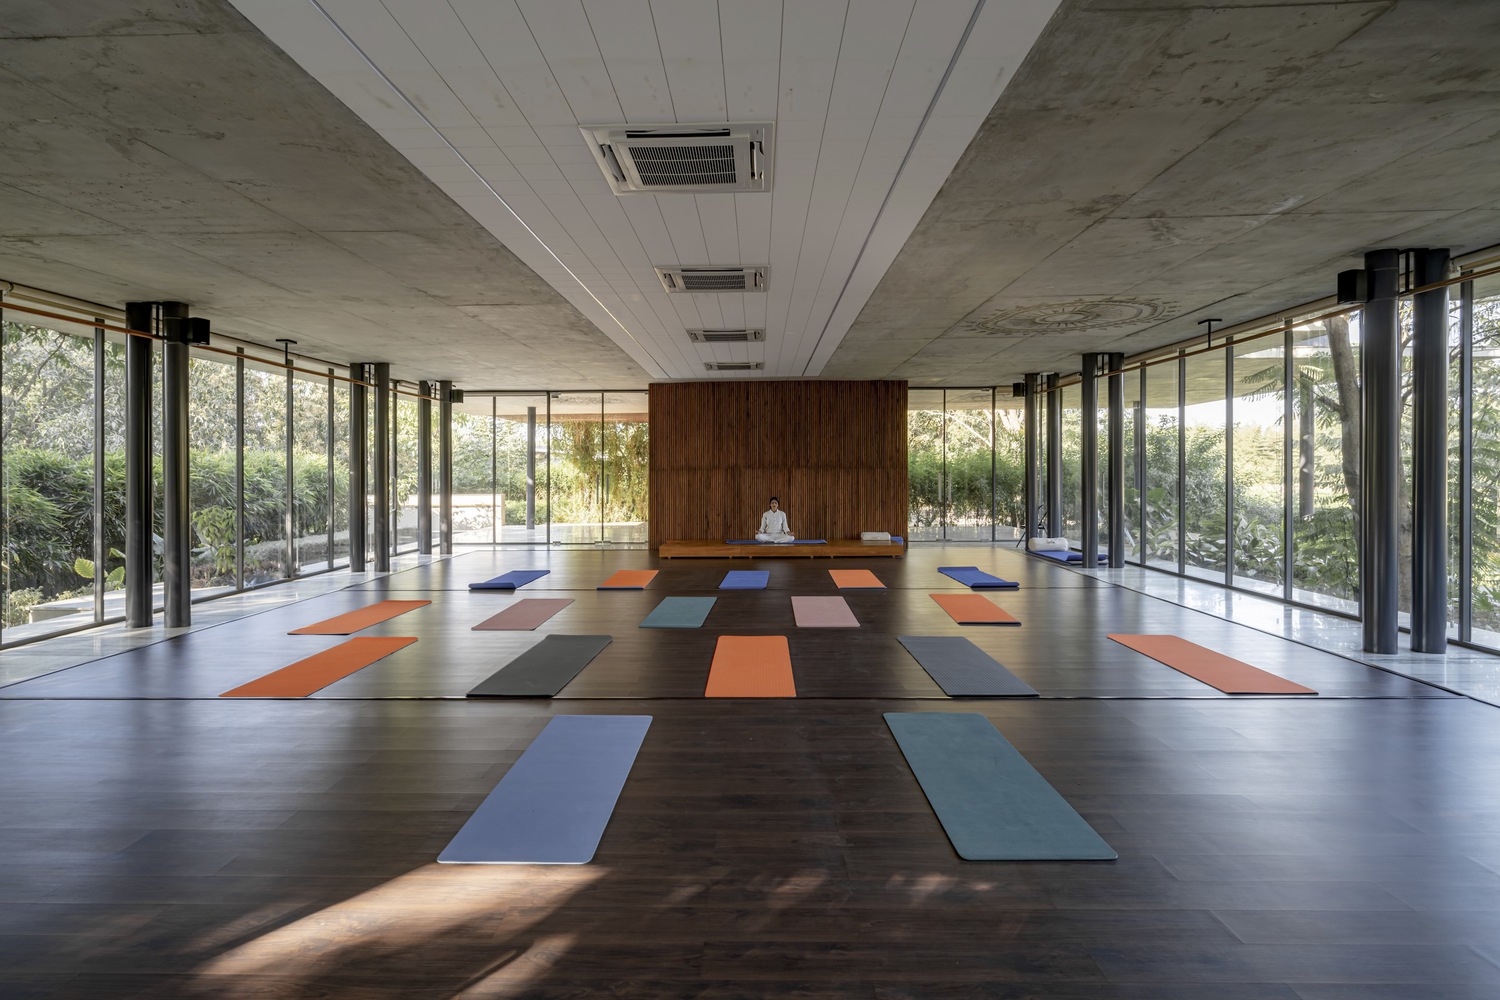 Yoga room as one of the activities for self-relaxation